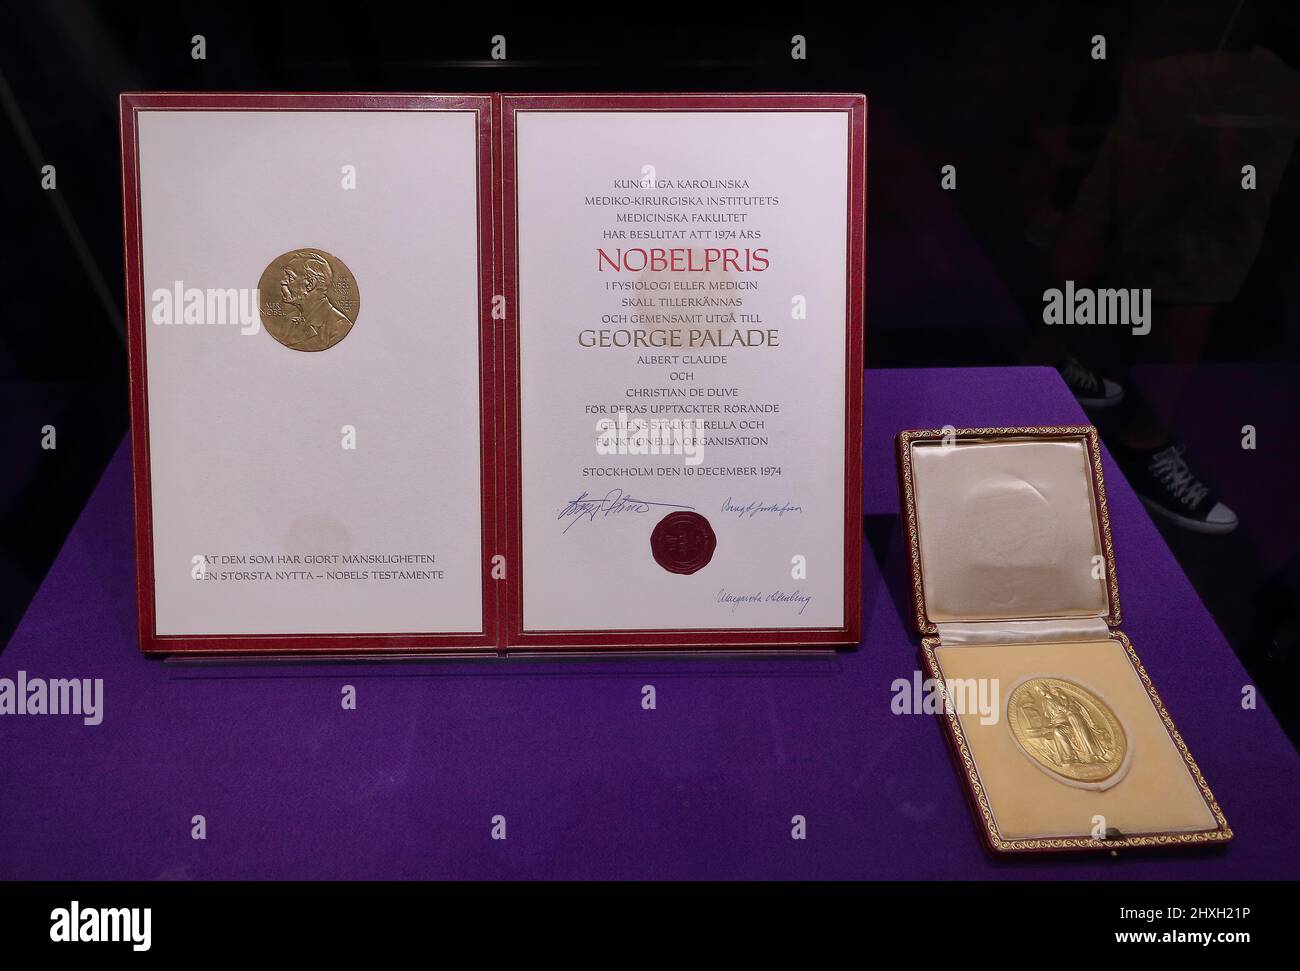 Bucharest, Romania - May 19, 2018: The Nobel Prize of George Emil Palade is donated by his descendants to the National History Museum of Romania, in B Stock Photo